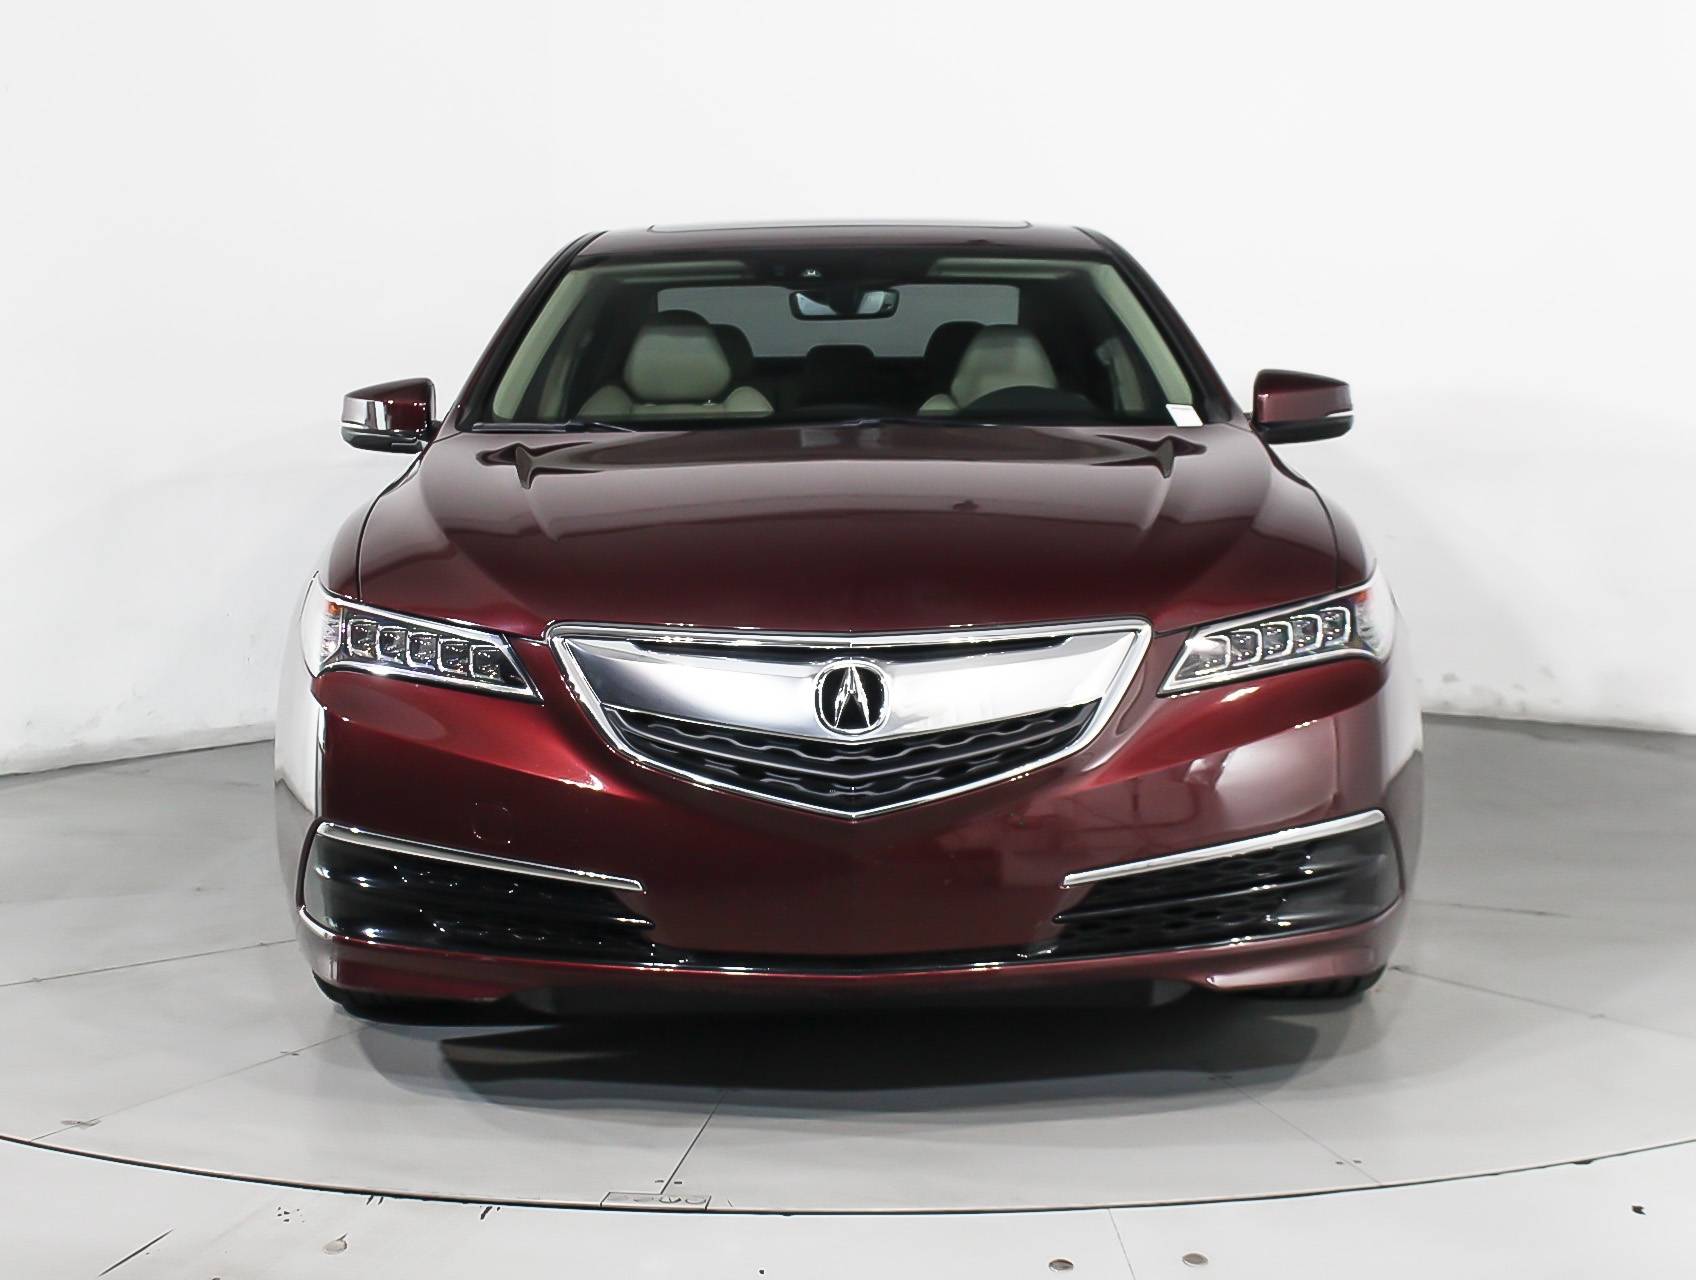 Florida Fine Cars - Used ACURA TLX 2016 MARGATE TECHNOLOGY PACKAGE